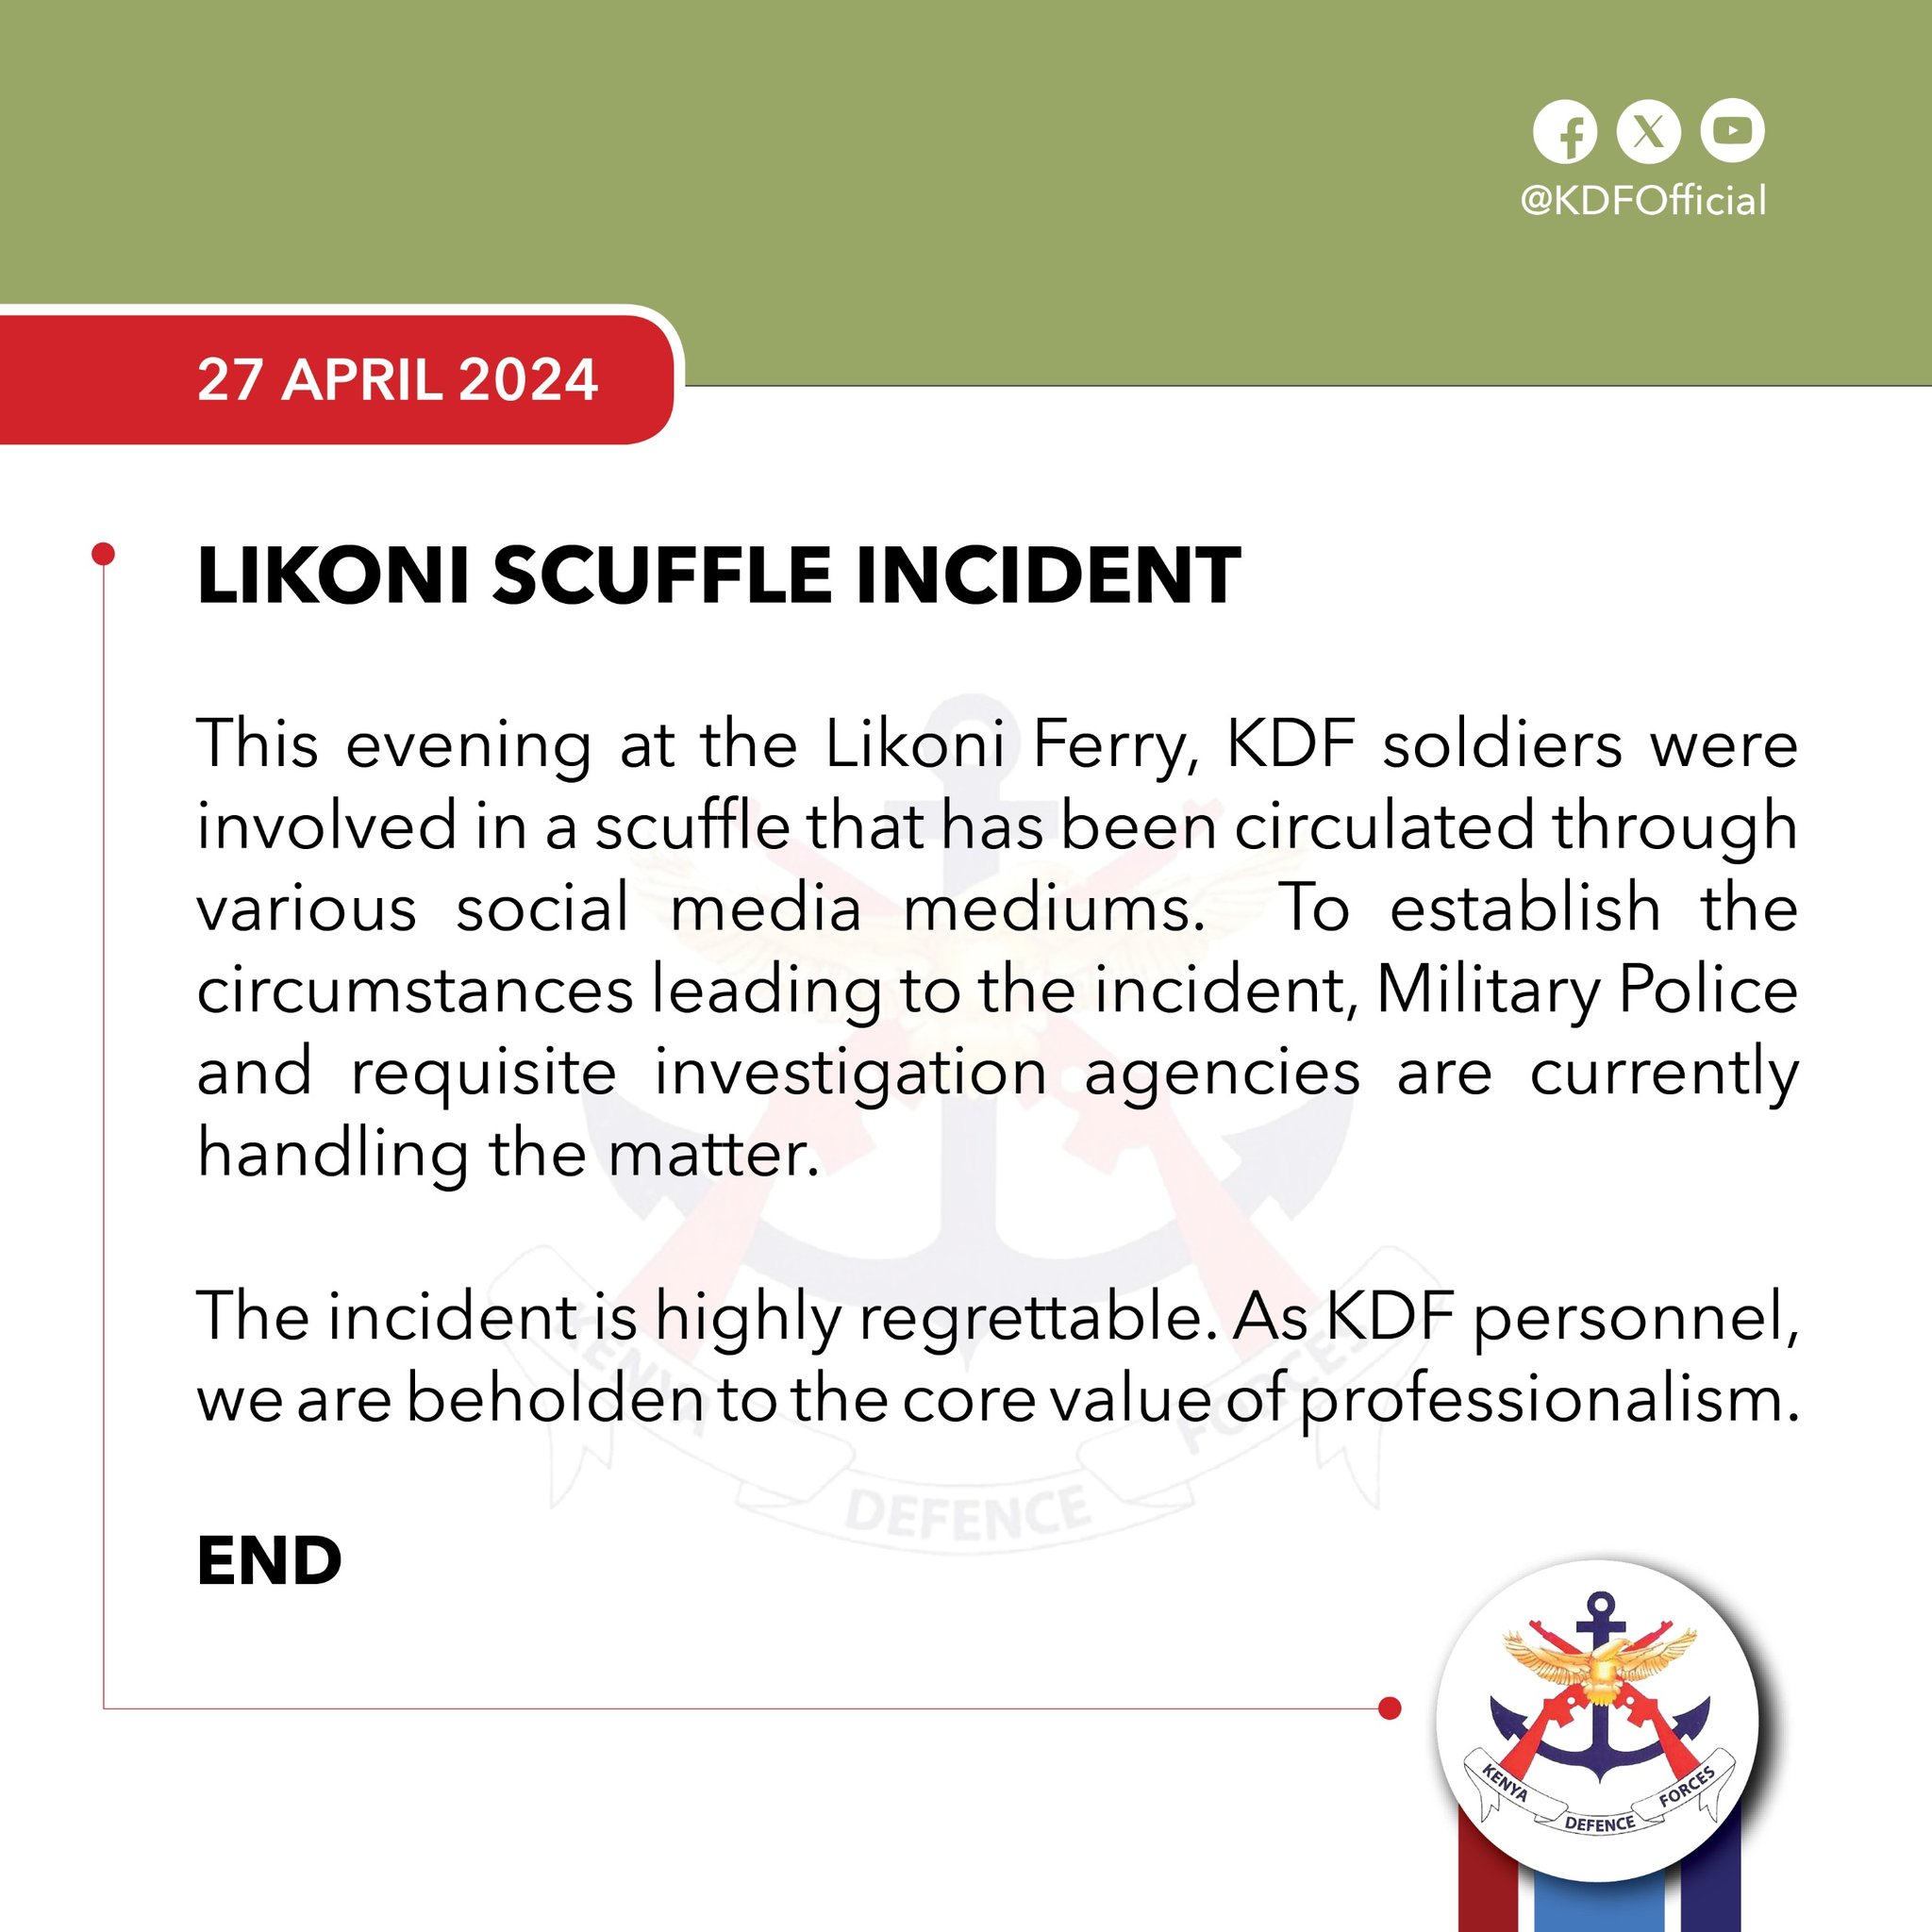 Kenya Defence Forces on X: "Statement on Likoni Scuffle Incident.  https://t.co/iGjY7inSY4" / X